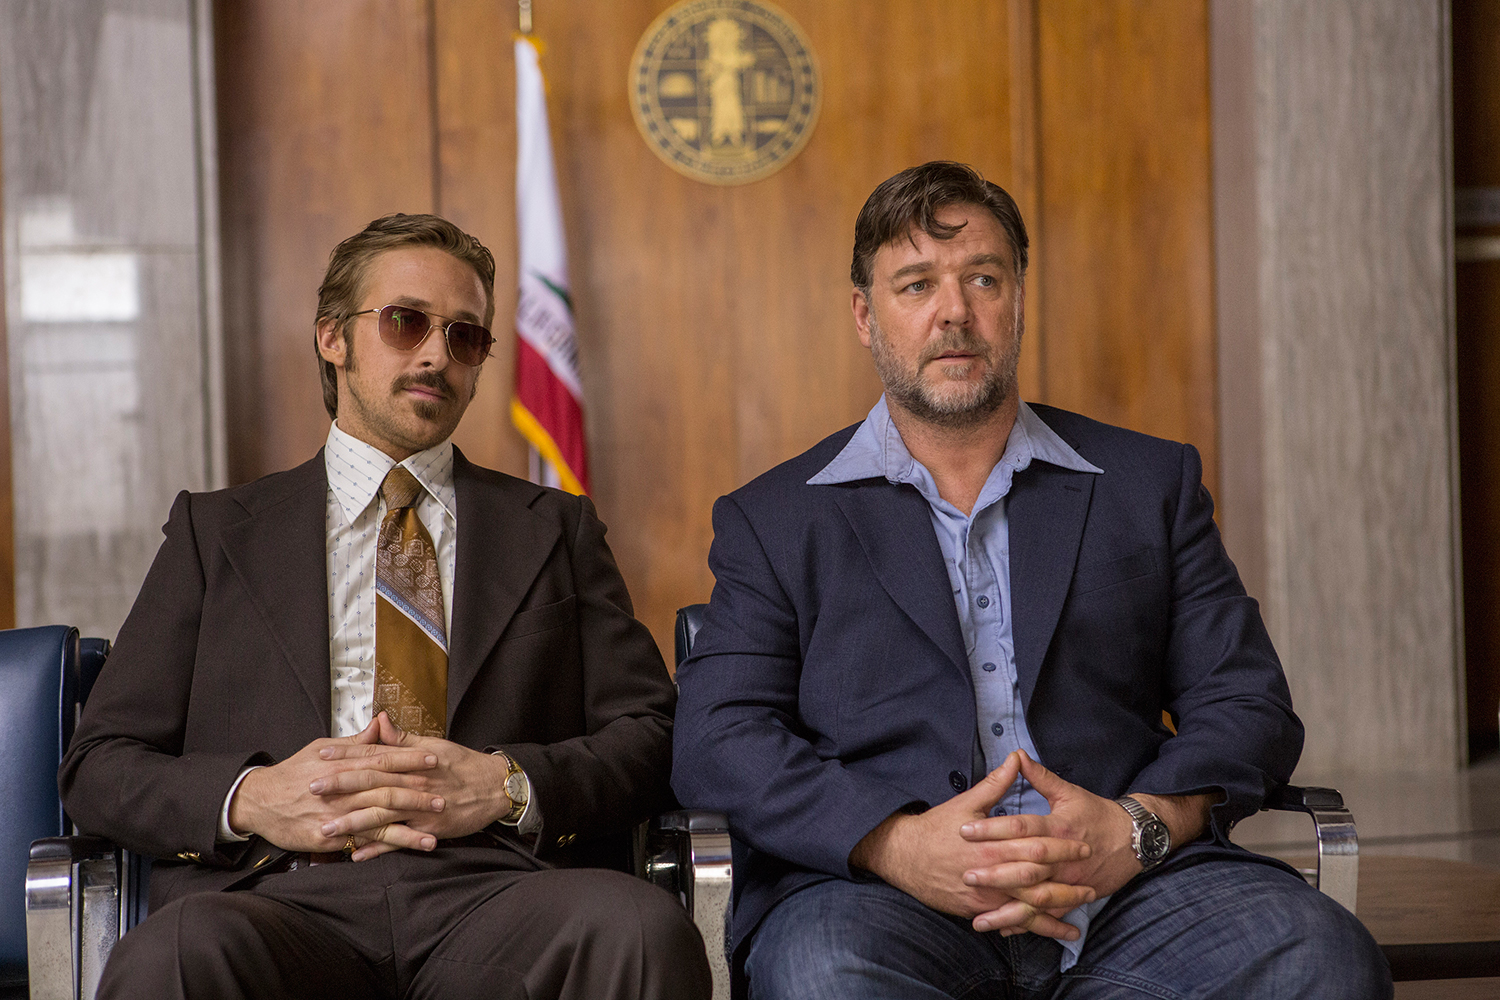 Ryan Gosling and Russell Crowe sit nextto each other in a scene from The Nice Guys.